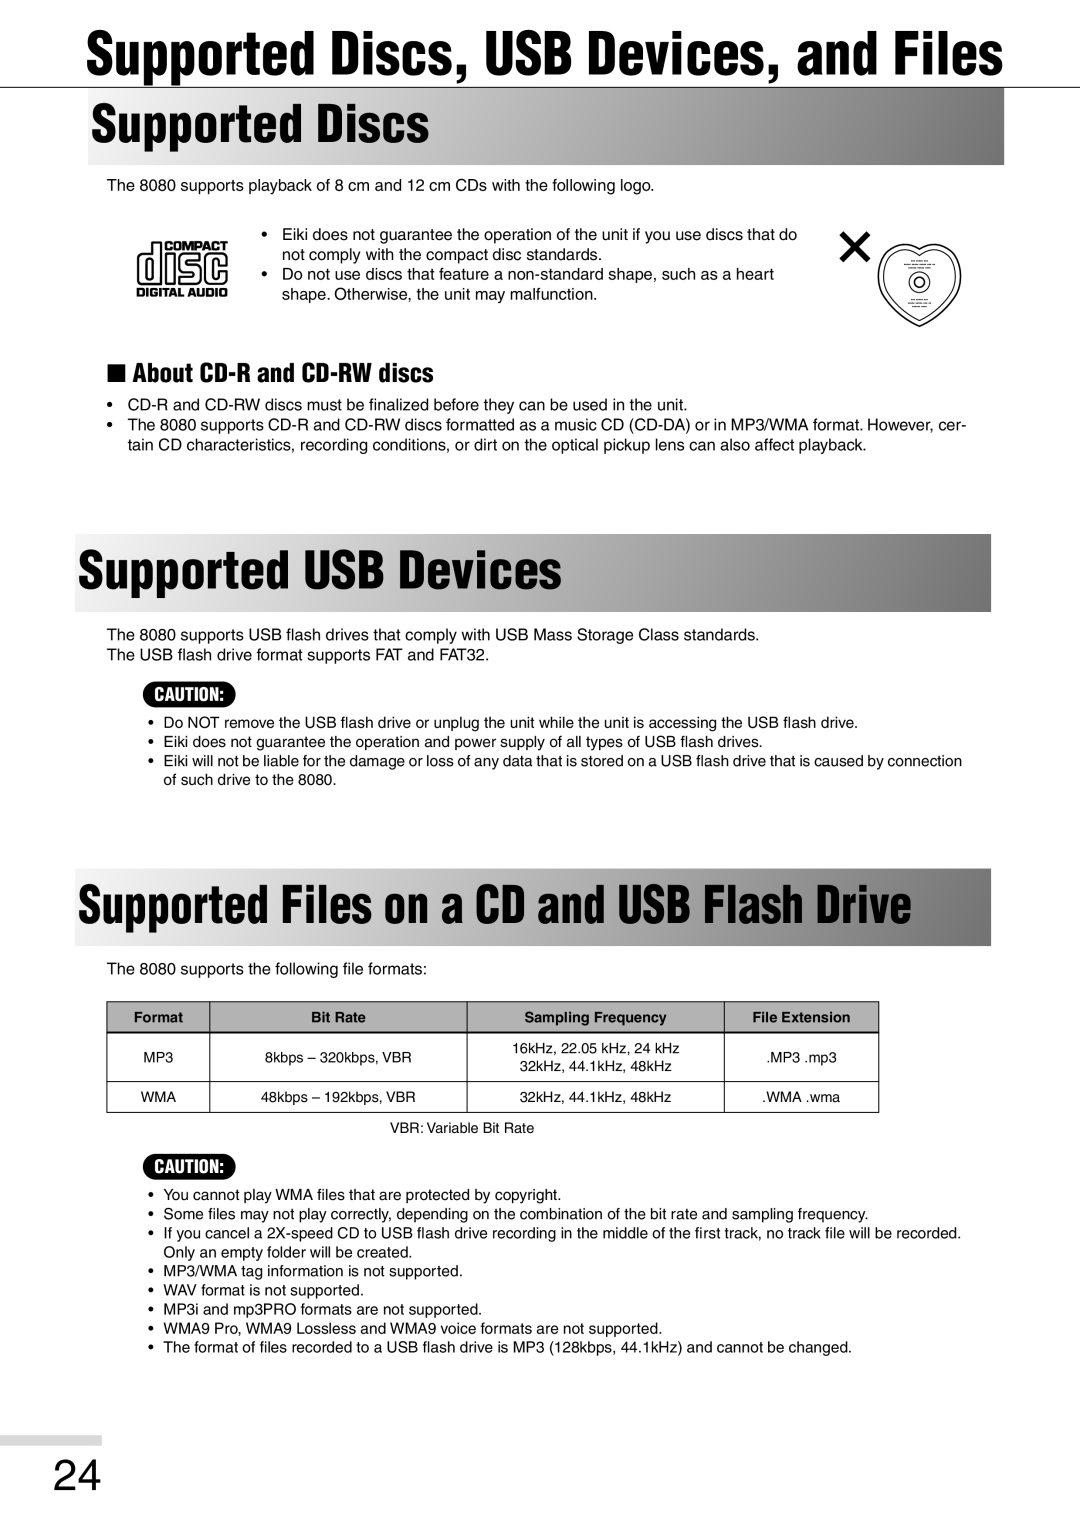 Eiki 8080 Supported Discs, USB Devices, and Files, Supported USB Devices, Supported Files on a CD and USB Flash Drive 